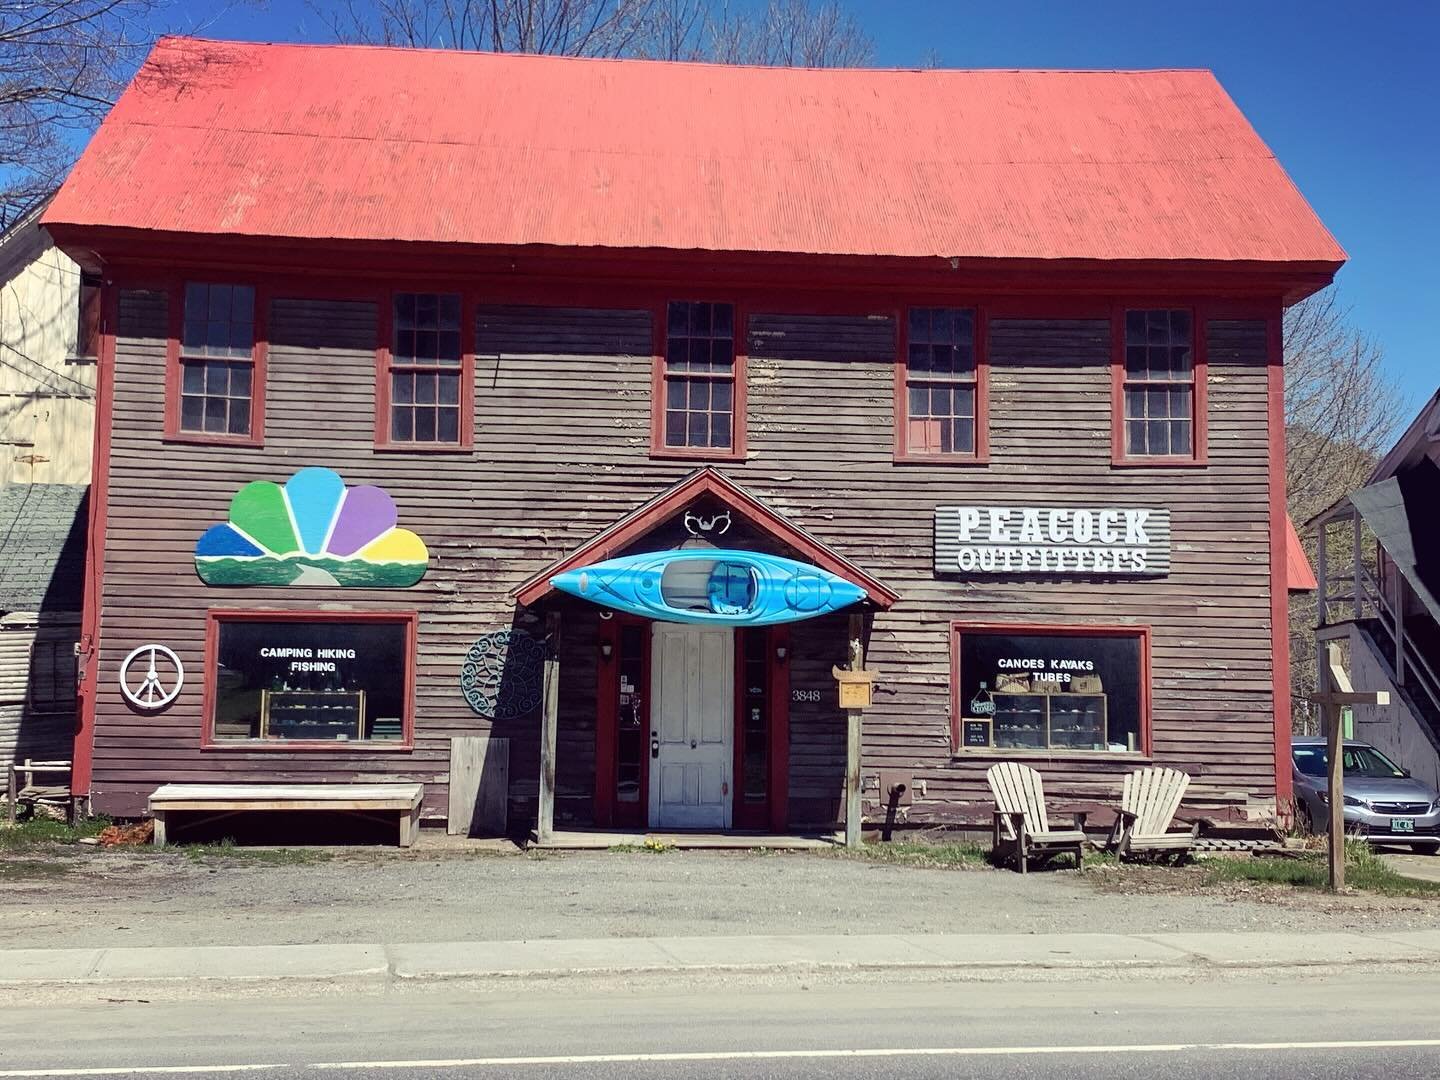 So many summer activities to enjoy when you come visit Sun Lodge. Peacock Outfitters provides kayak rentals, river tubing and guided fish tours. All at our doorstep! #southernvermont #outdoorlife